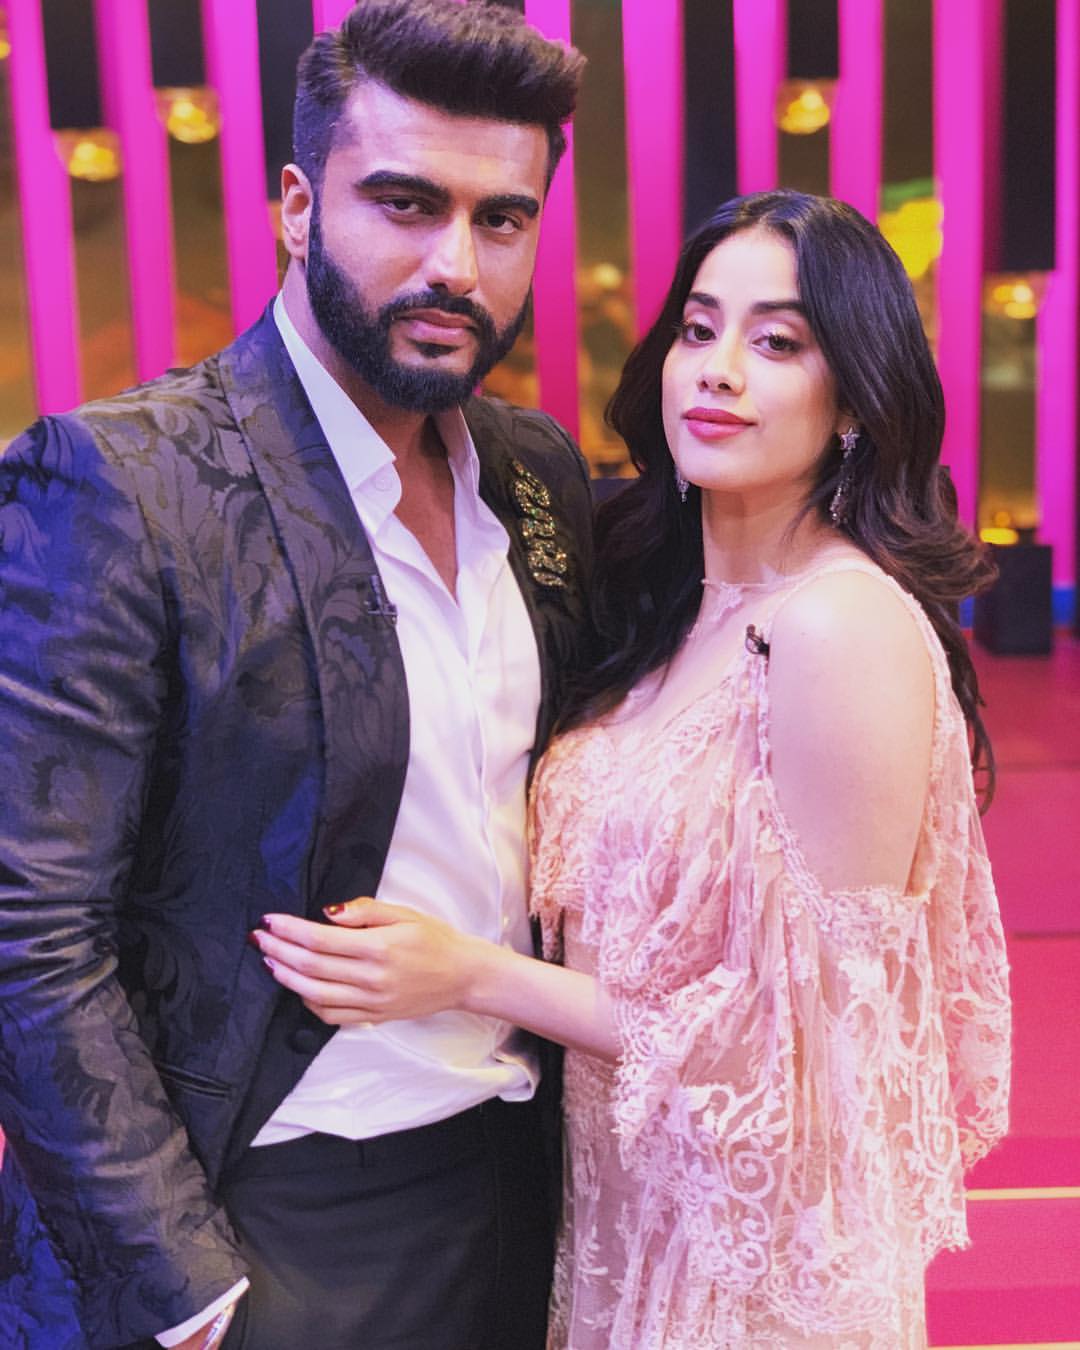 Koffee With Karan 6 Highlights Arjun Kapoor and Janhvi Kapoor showed that Its all about loving your family PINKVILLA